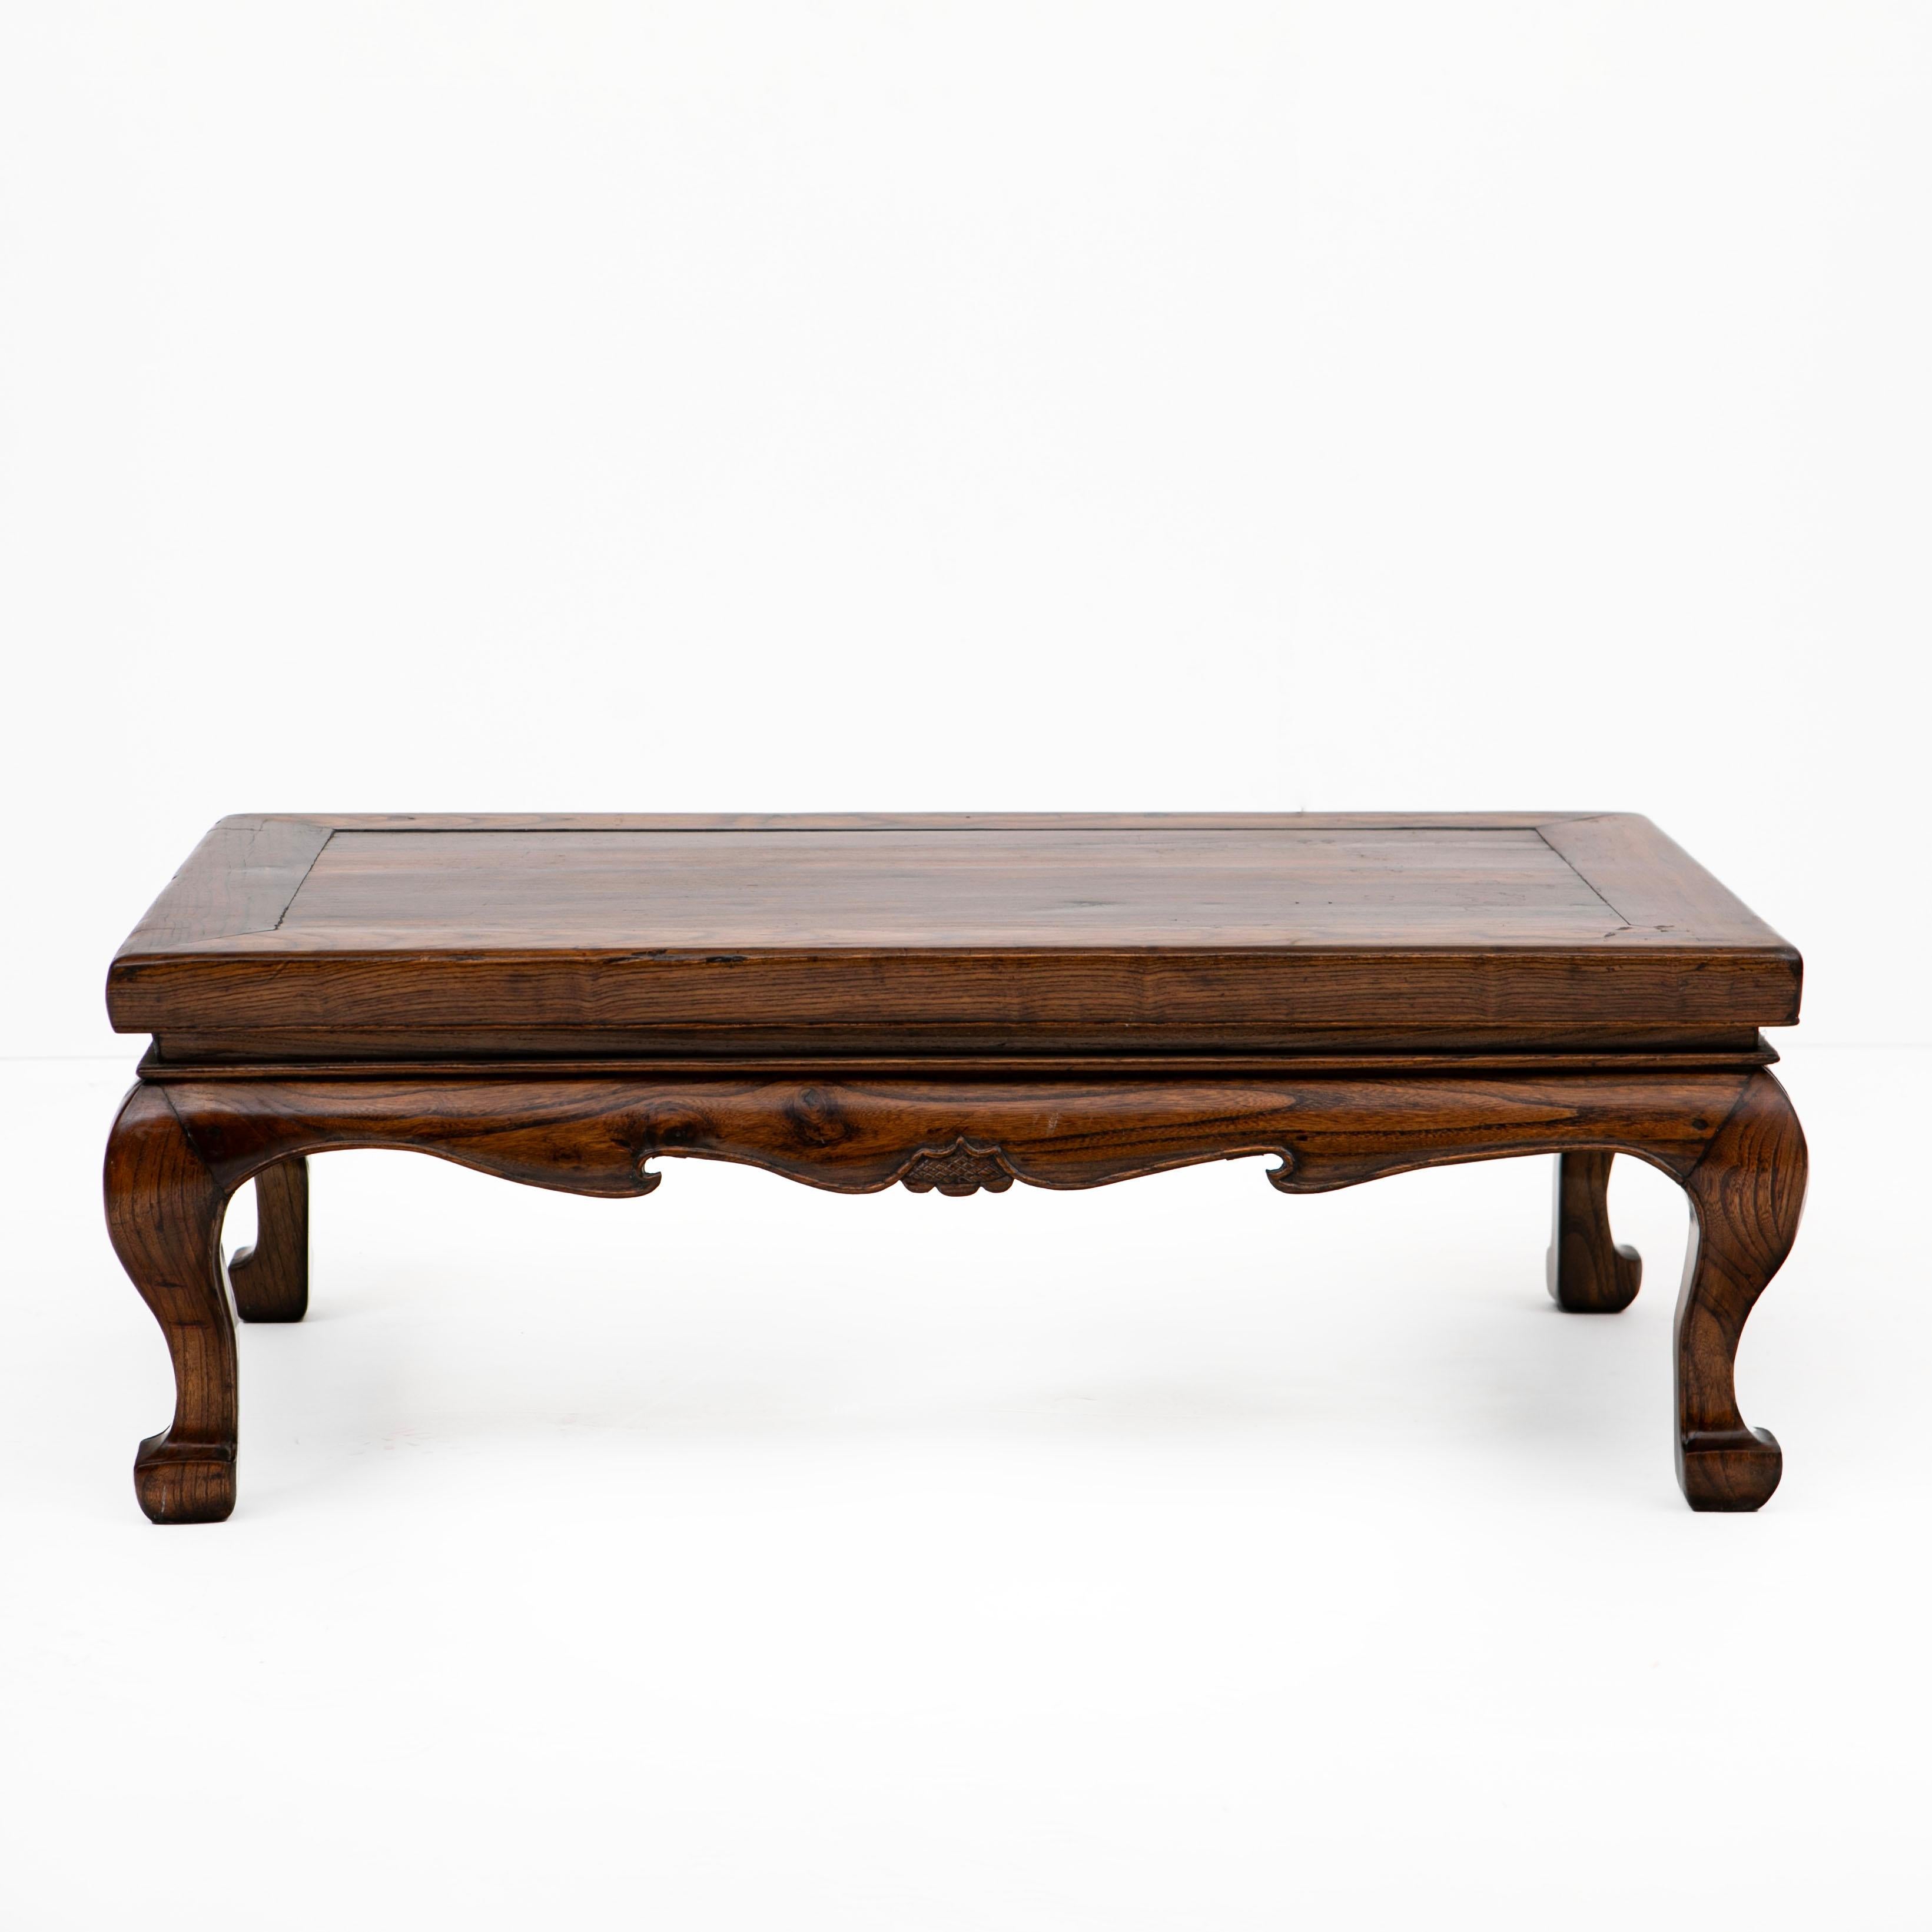 A Chinese kang table from China mid-19th century.
This low table is crafted in lacquered elm wood. It features a rectangular framed top and solid floating panel.
In original condition with a beautiful natural age-related patina highlighted with a